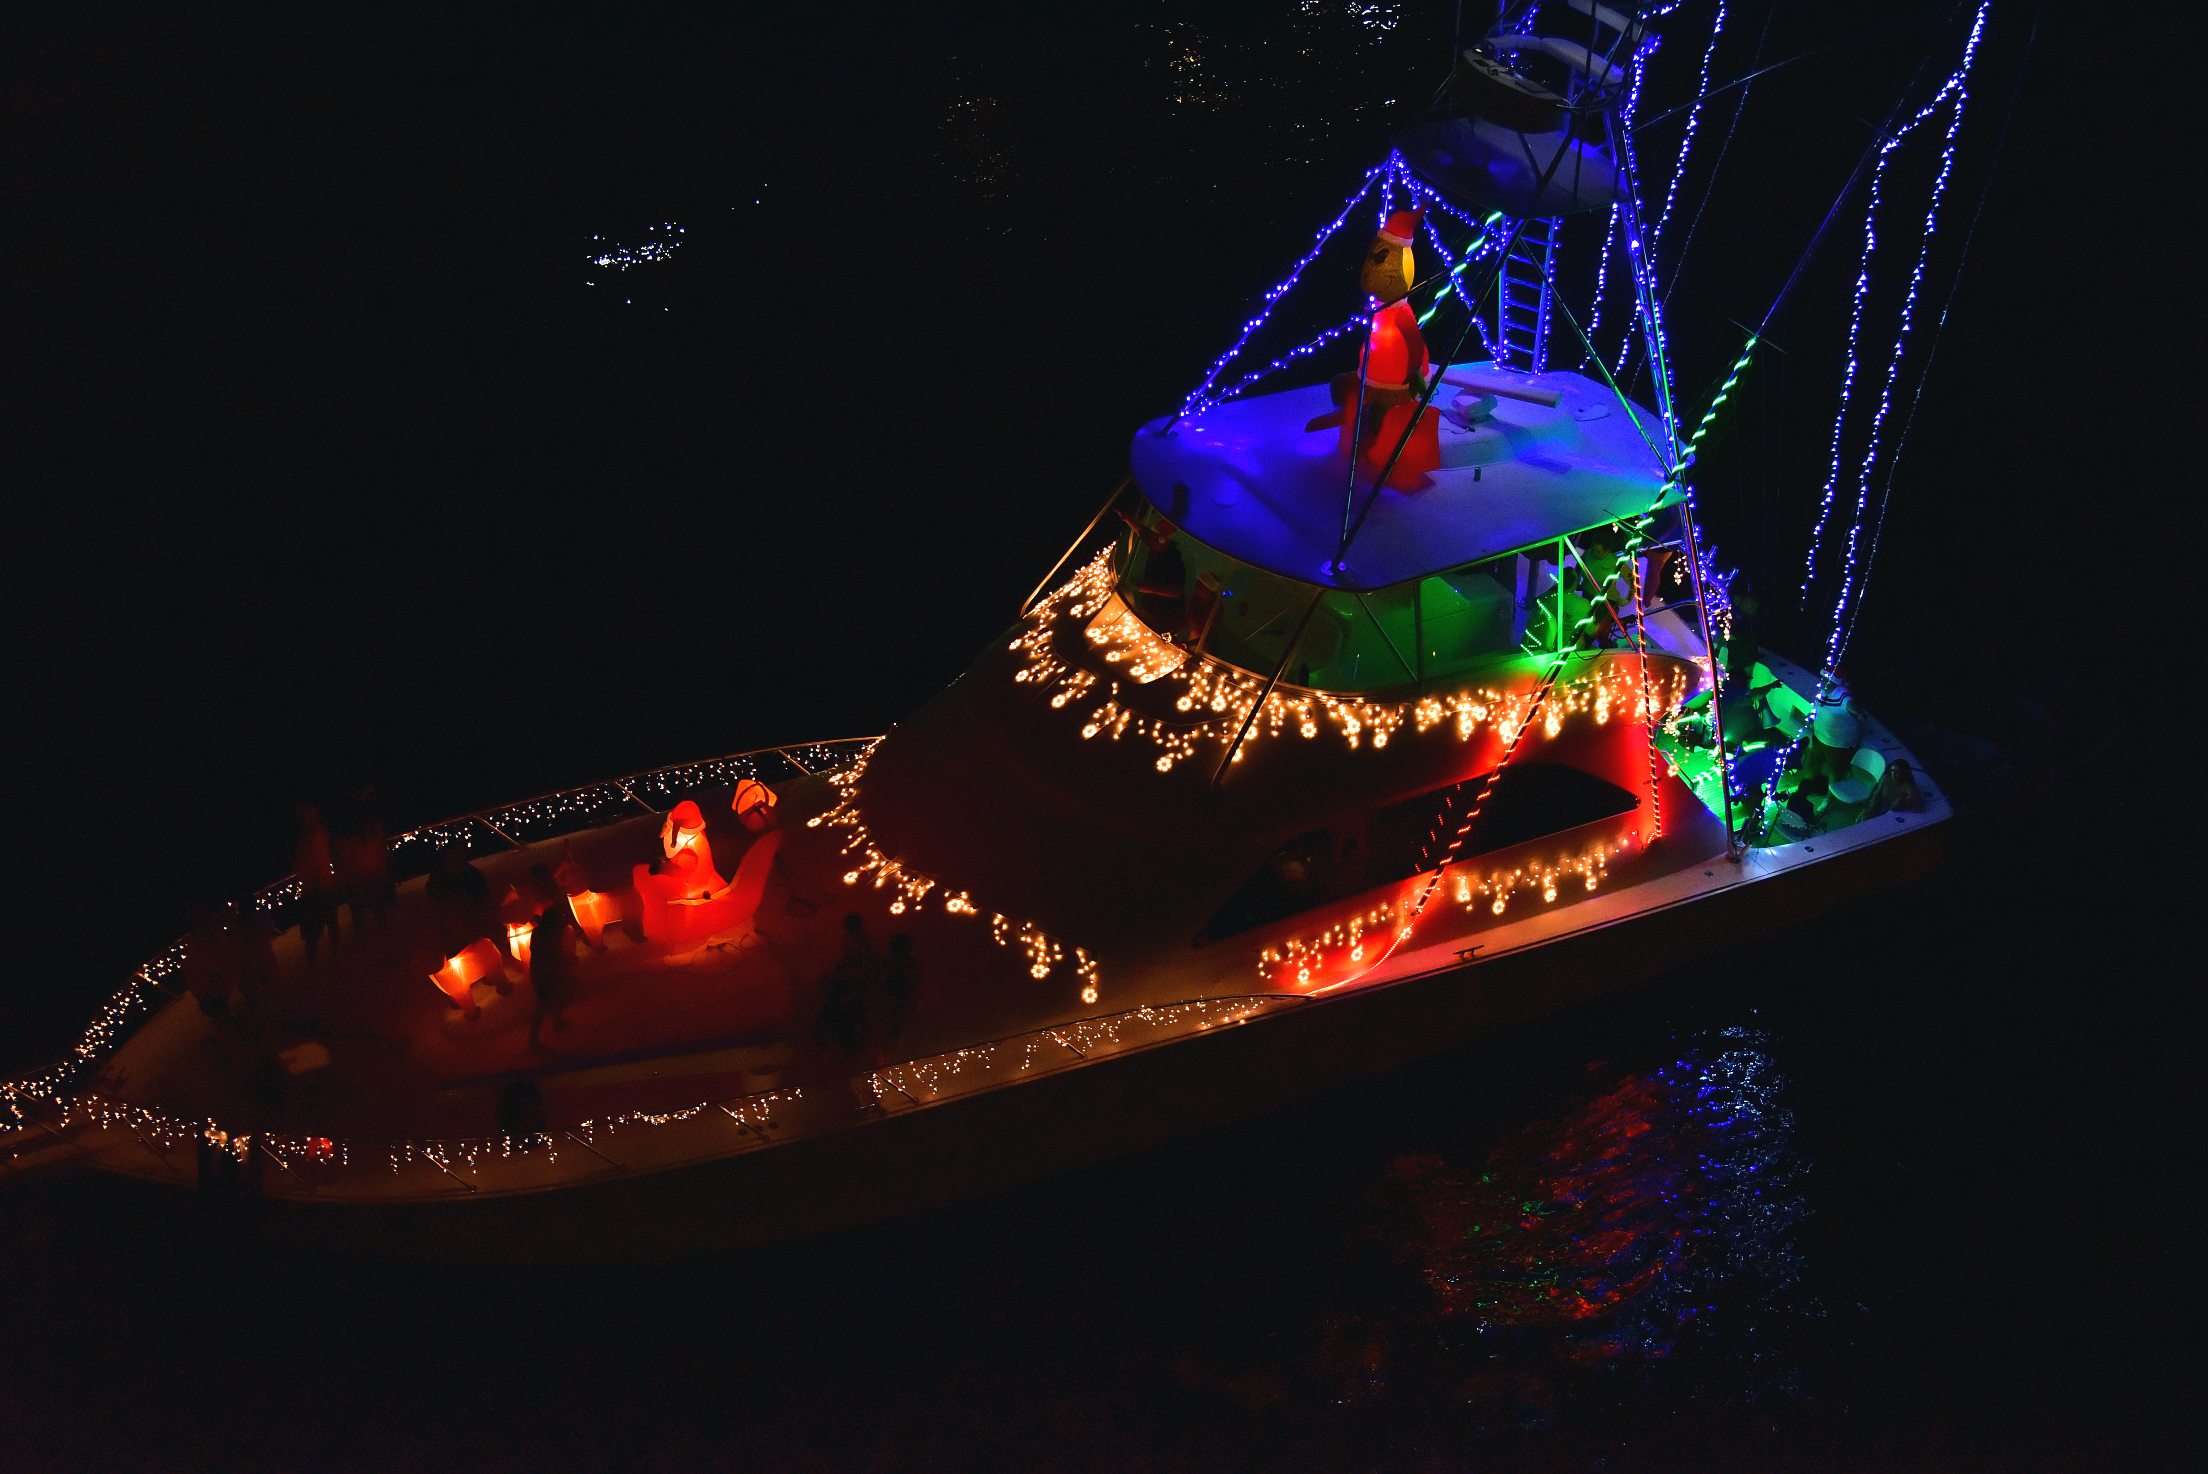 Don't Stop Believin', boat number 71 in the 2021 Winterfest Boat Parade